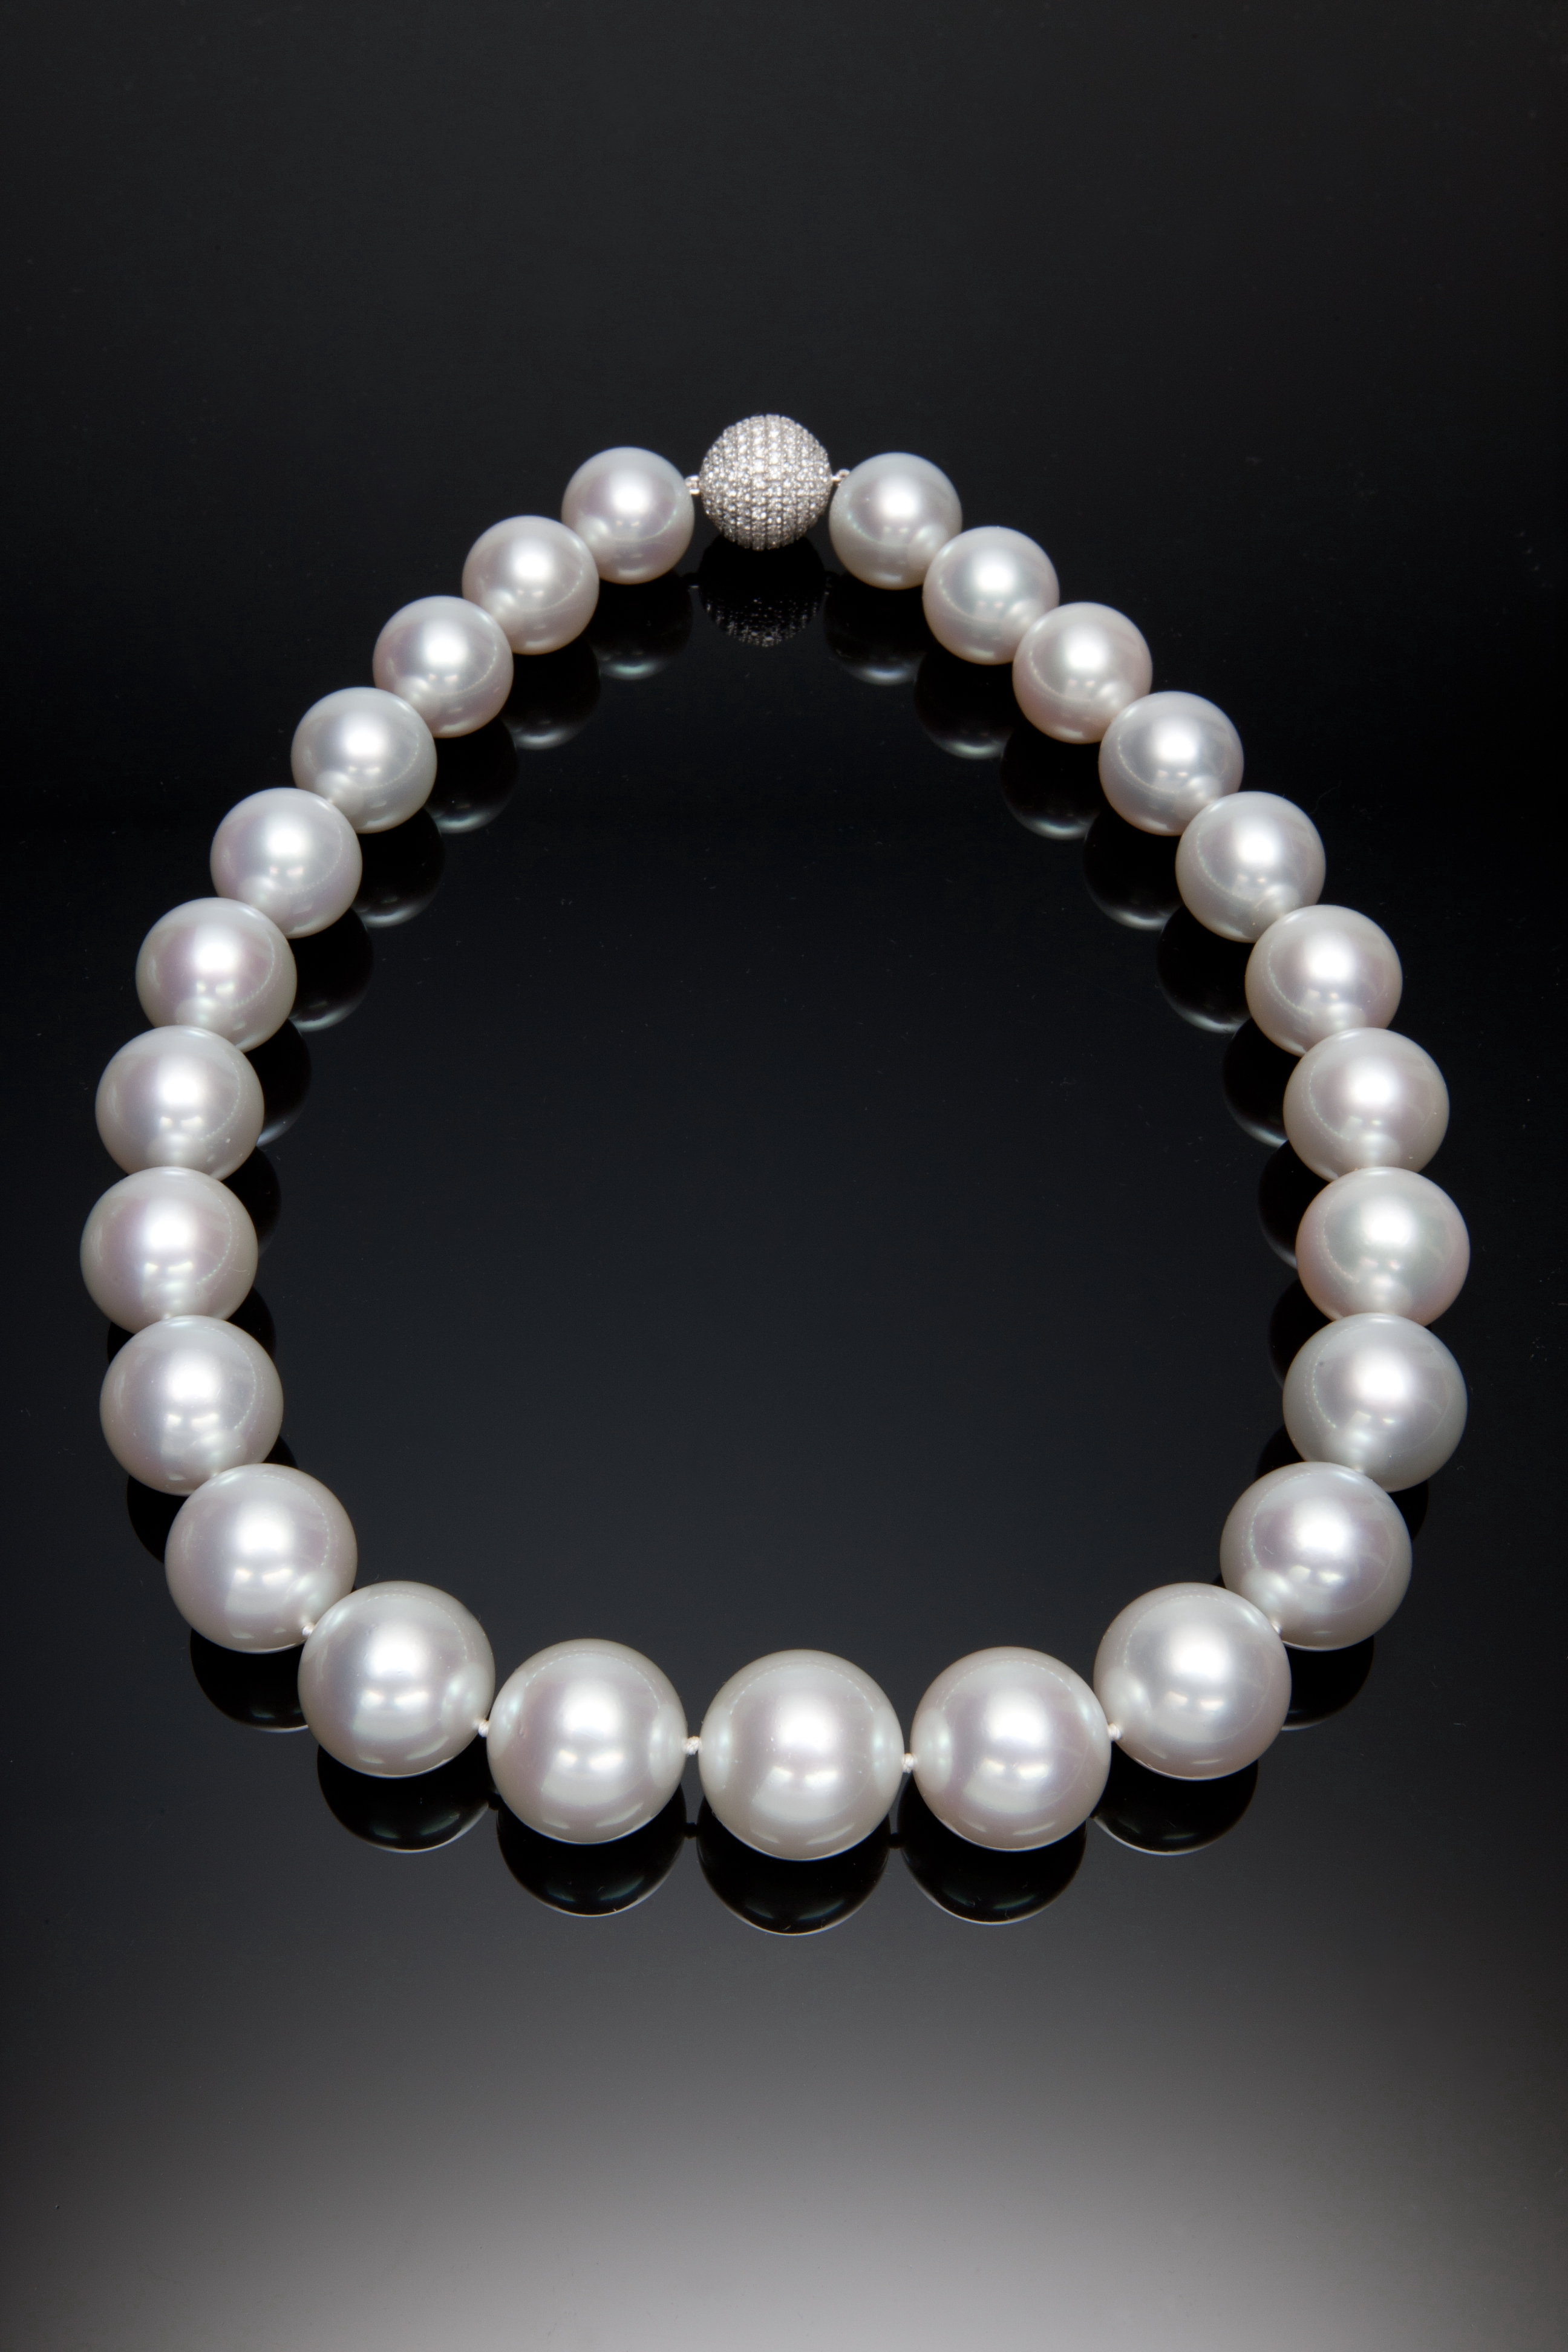 Pearls are the Jewels of the Sea! South Sea Pearls